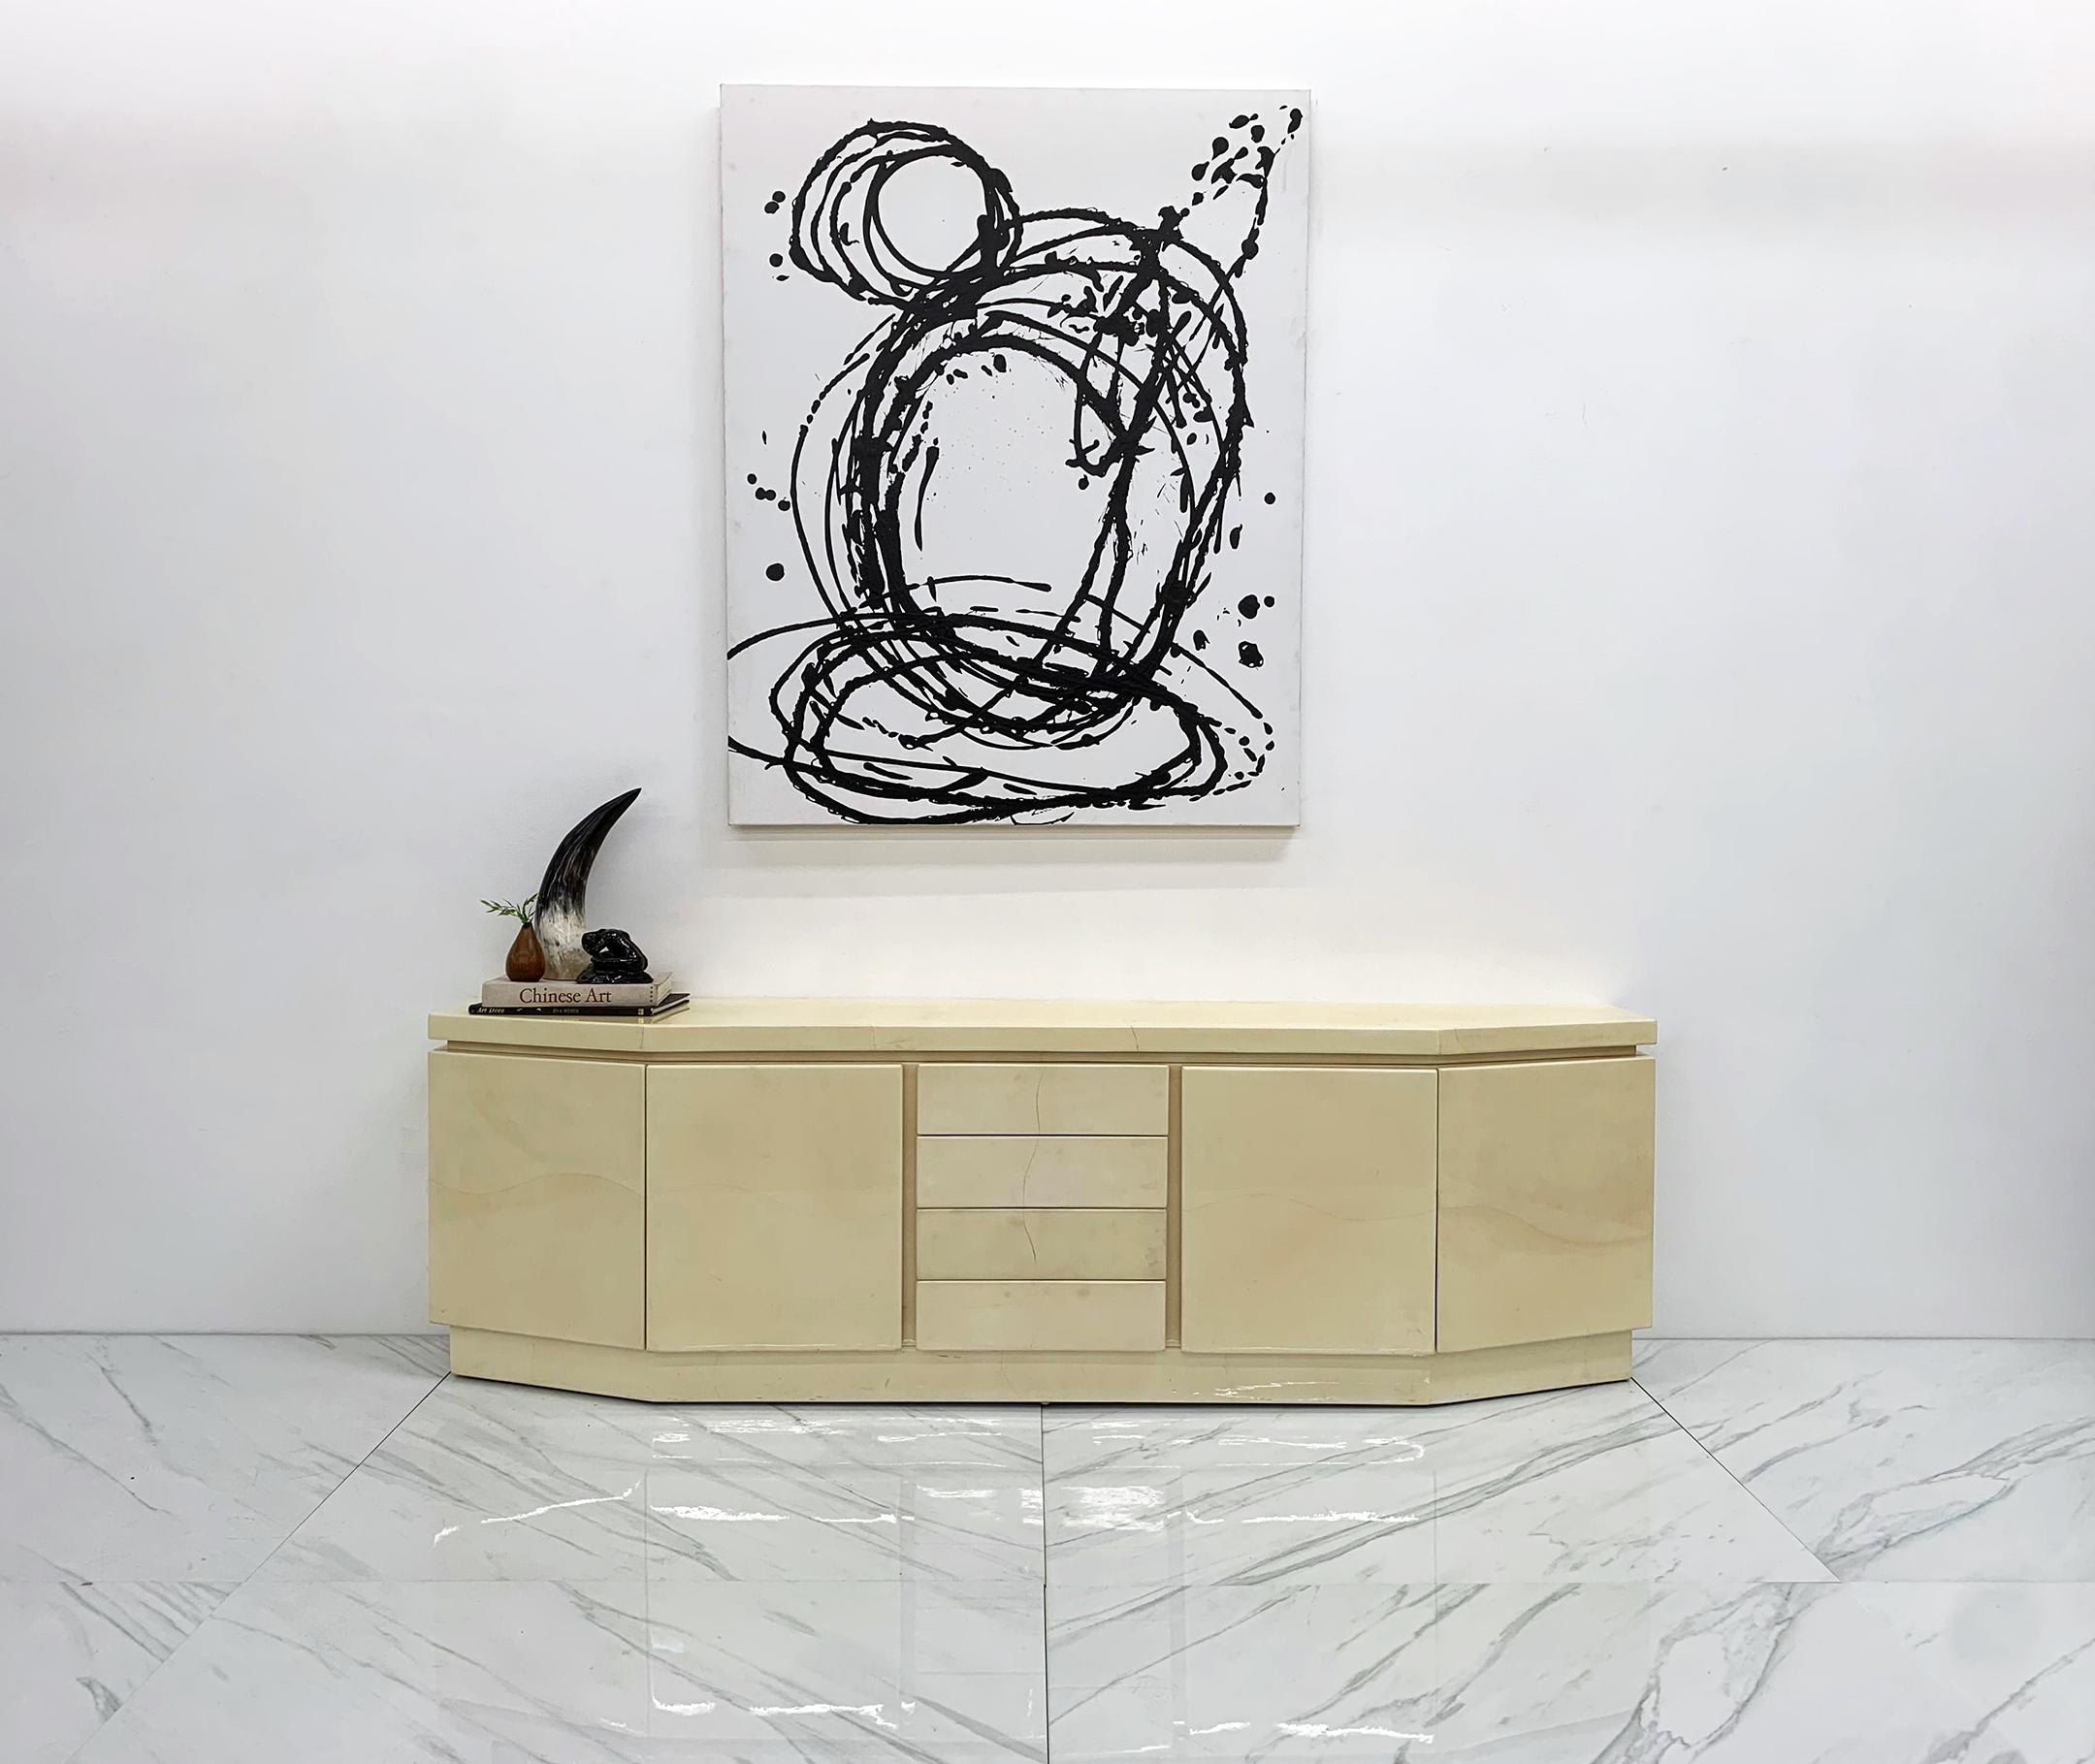 This piece is absolutely stunning!! A monumentally large Karl Springer custom angular credenza in a creamy, ultra luxurious goatskin. The goat skin hides on the front have a wonderfully matched curvy seem that is just stunning. This dreamy credenza